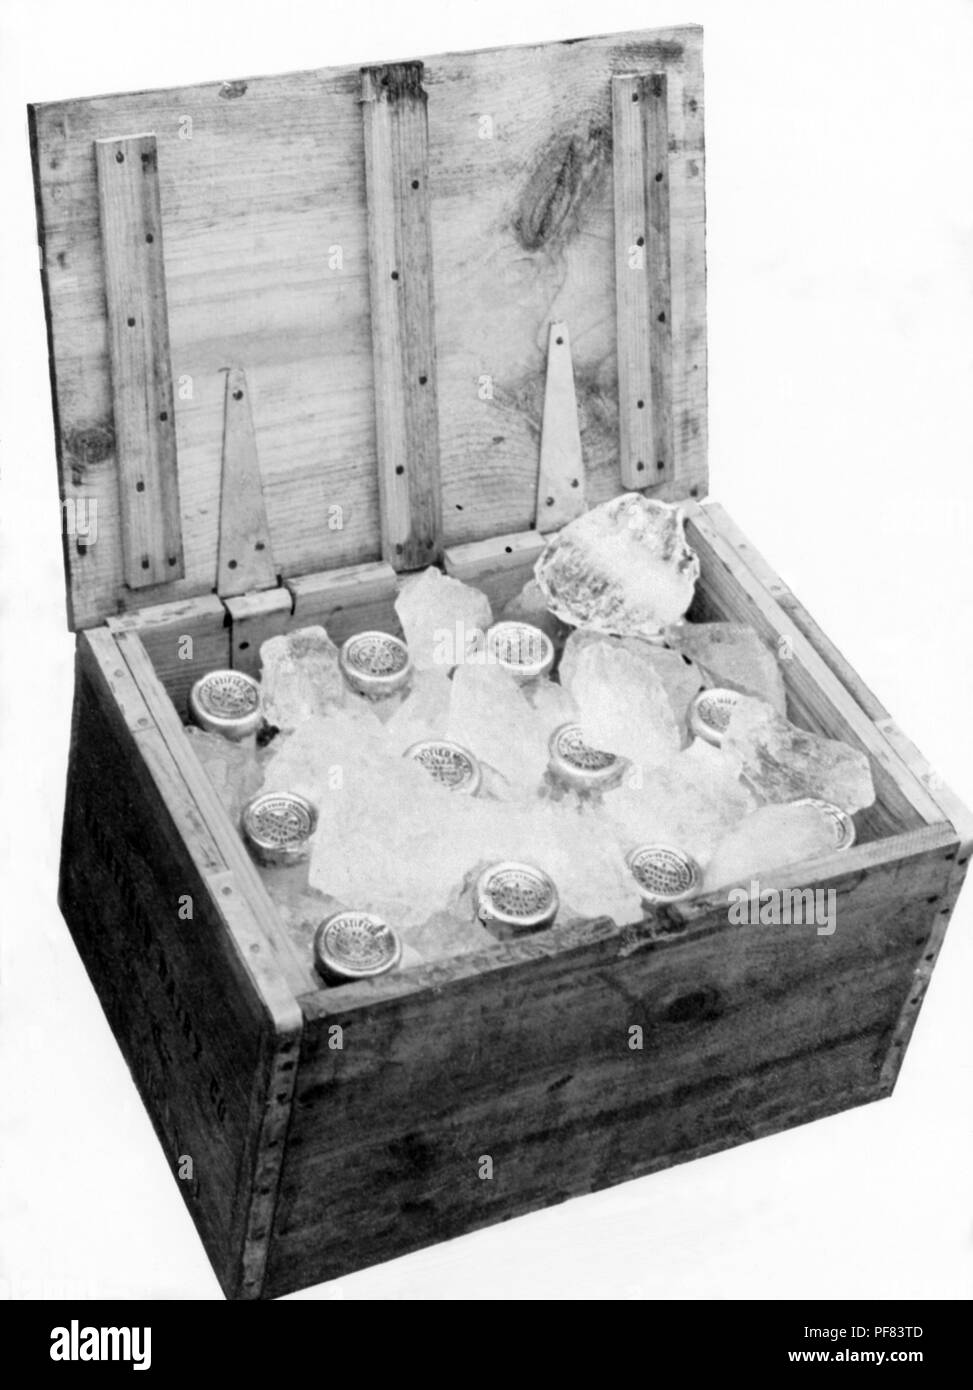 Milk bottles prepared for delivery by adding ice to the delivery case, 1929. Image courtesy Centers for Disease Control (CDC) / Minnesota Department of Health, R.N. Barr Library, Librarians Melissa Rethlefsen and Marie Jones. () Stock Photo